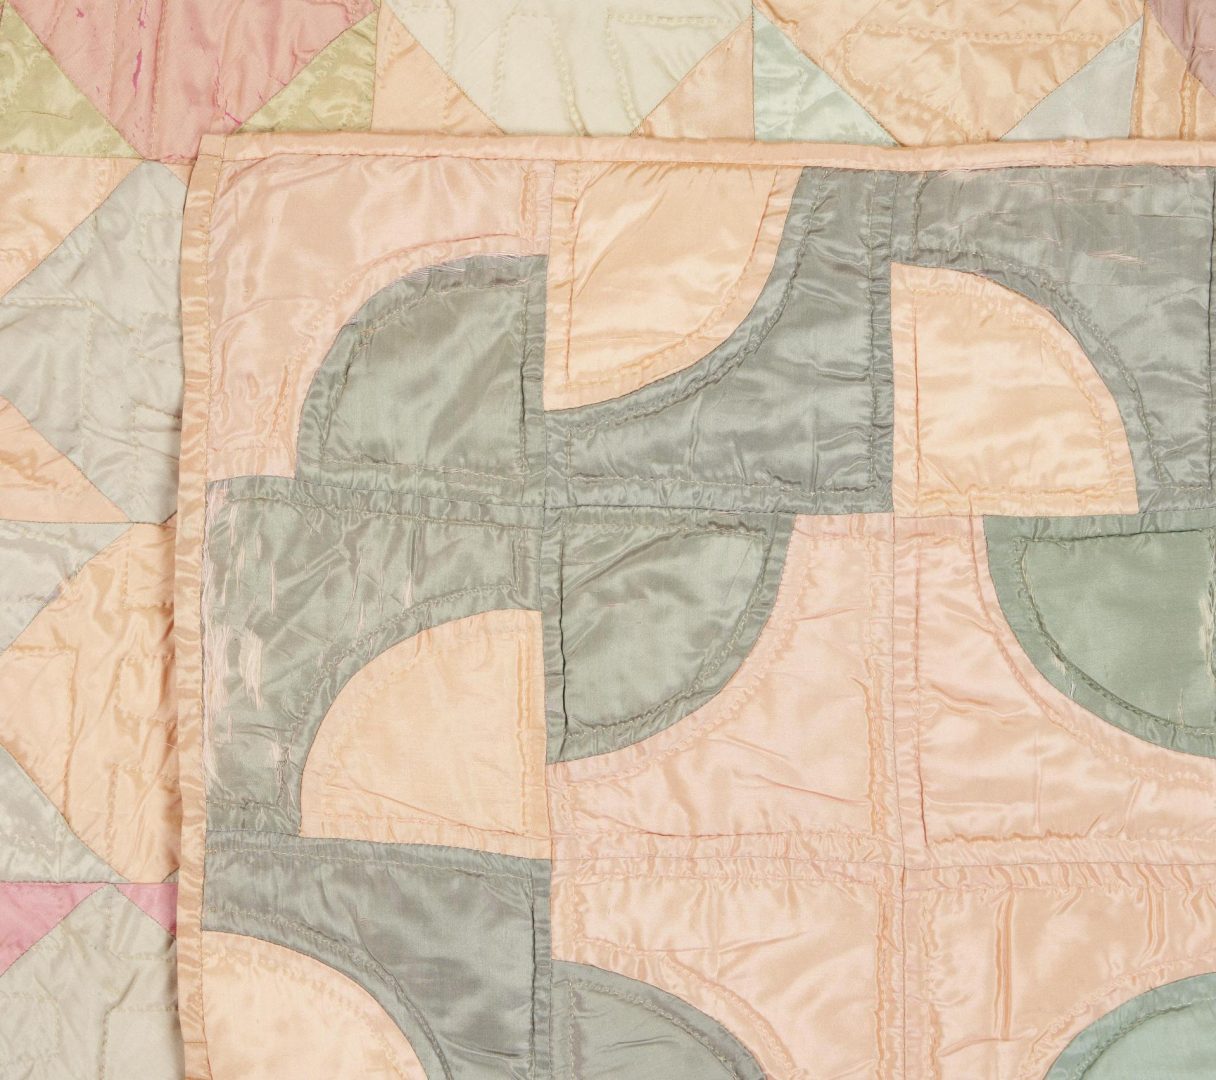 Lot 264: Double Sided Silk & Satin Quilt, Drunkard's Path & Square in a Square Patterns